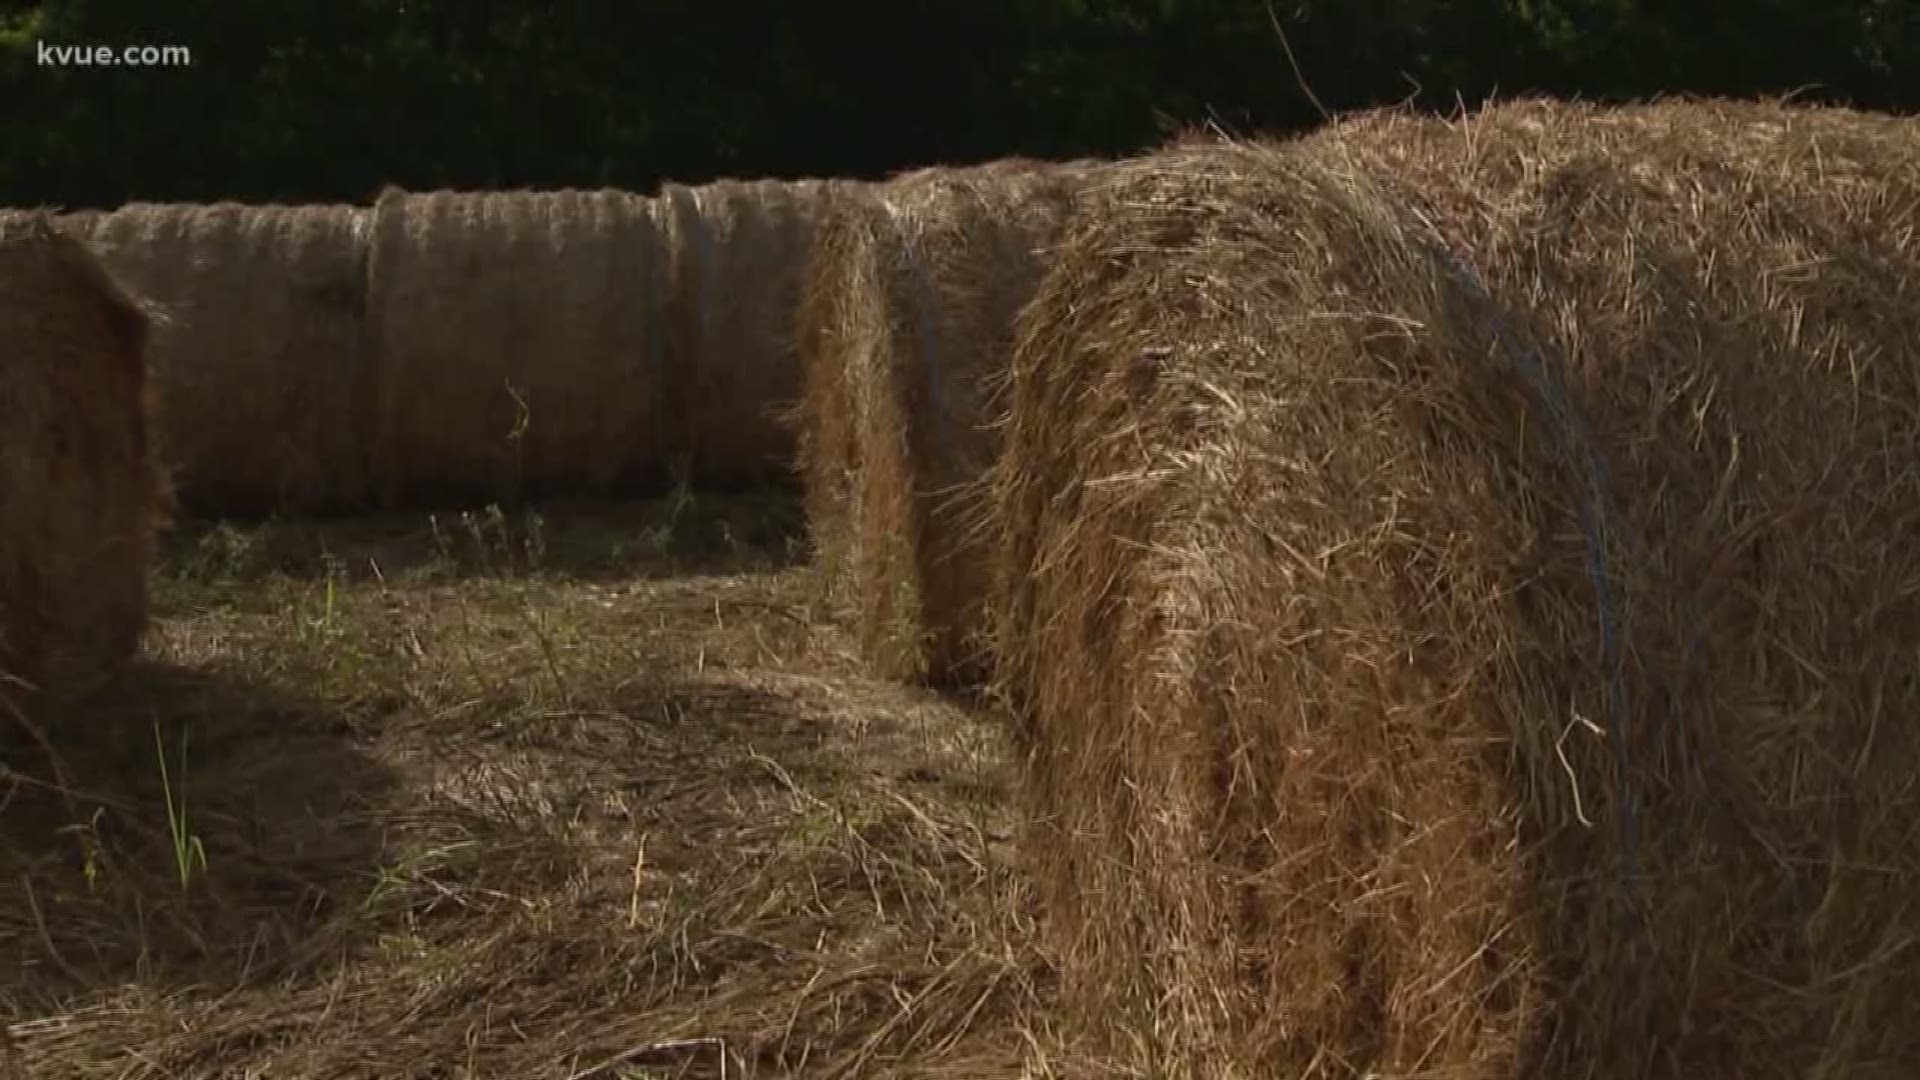 Central Texas ranchers are hoping for rain as they struggle to feed their cattle.